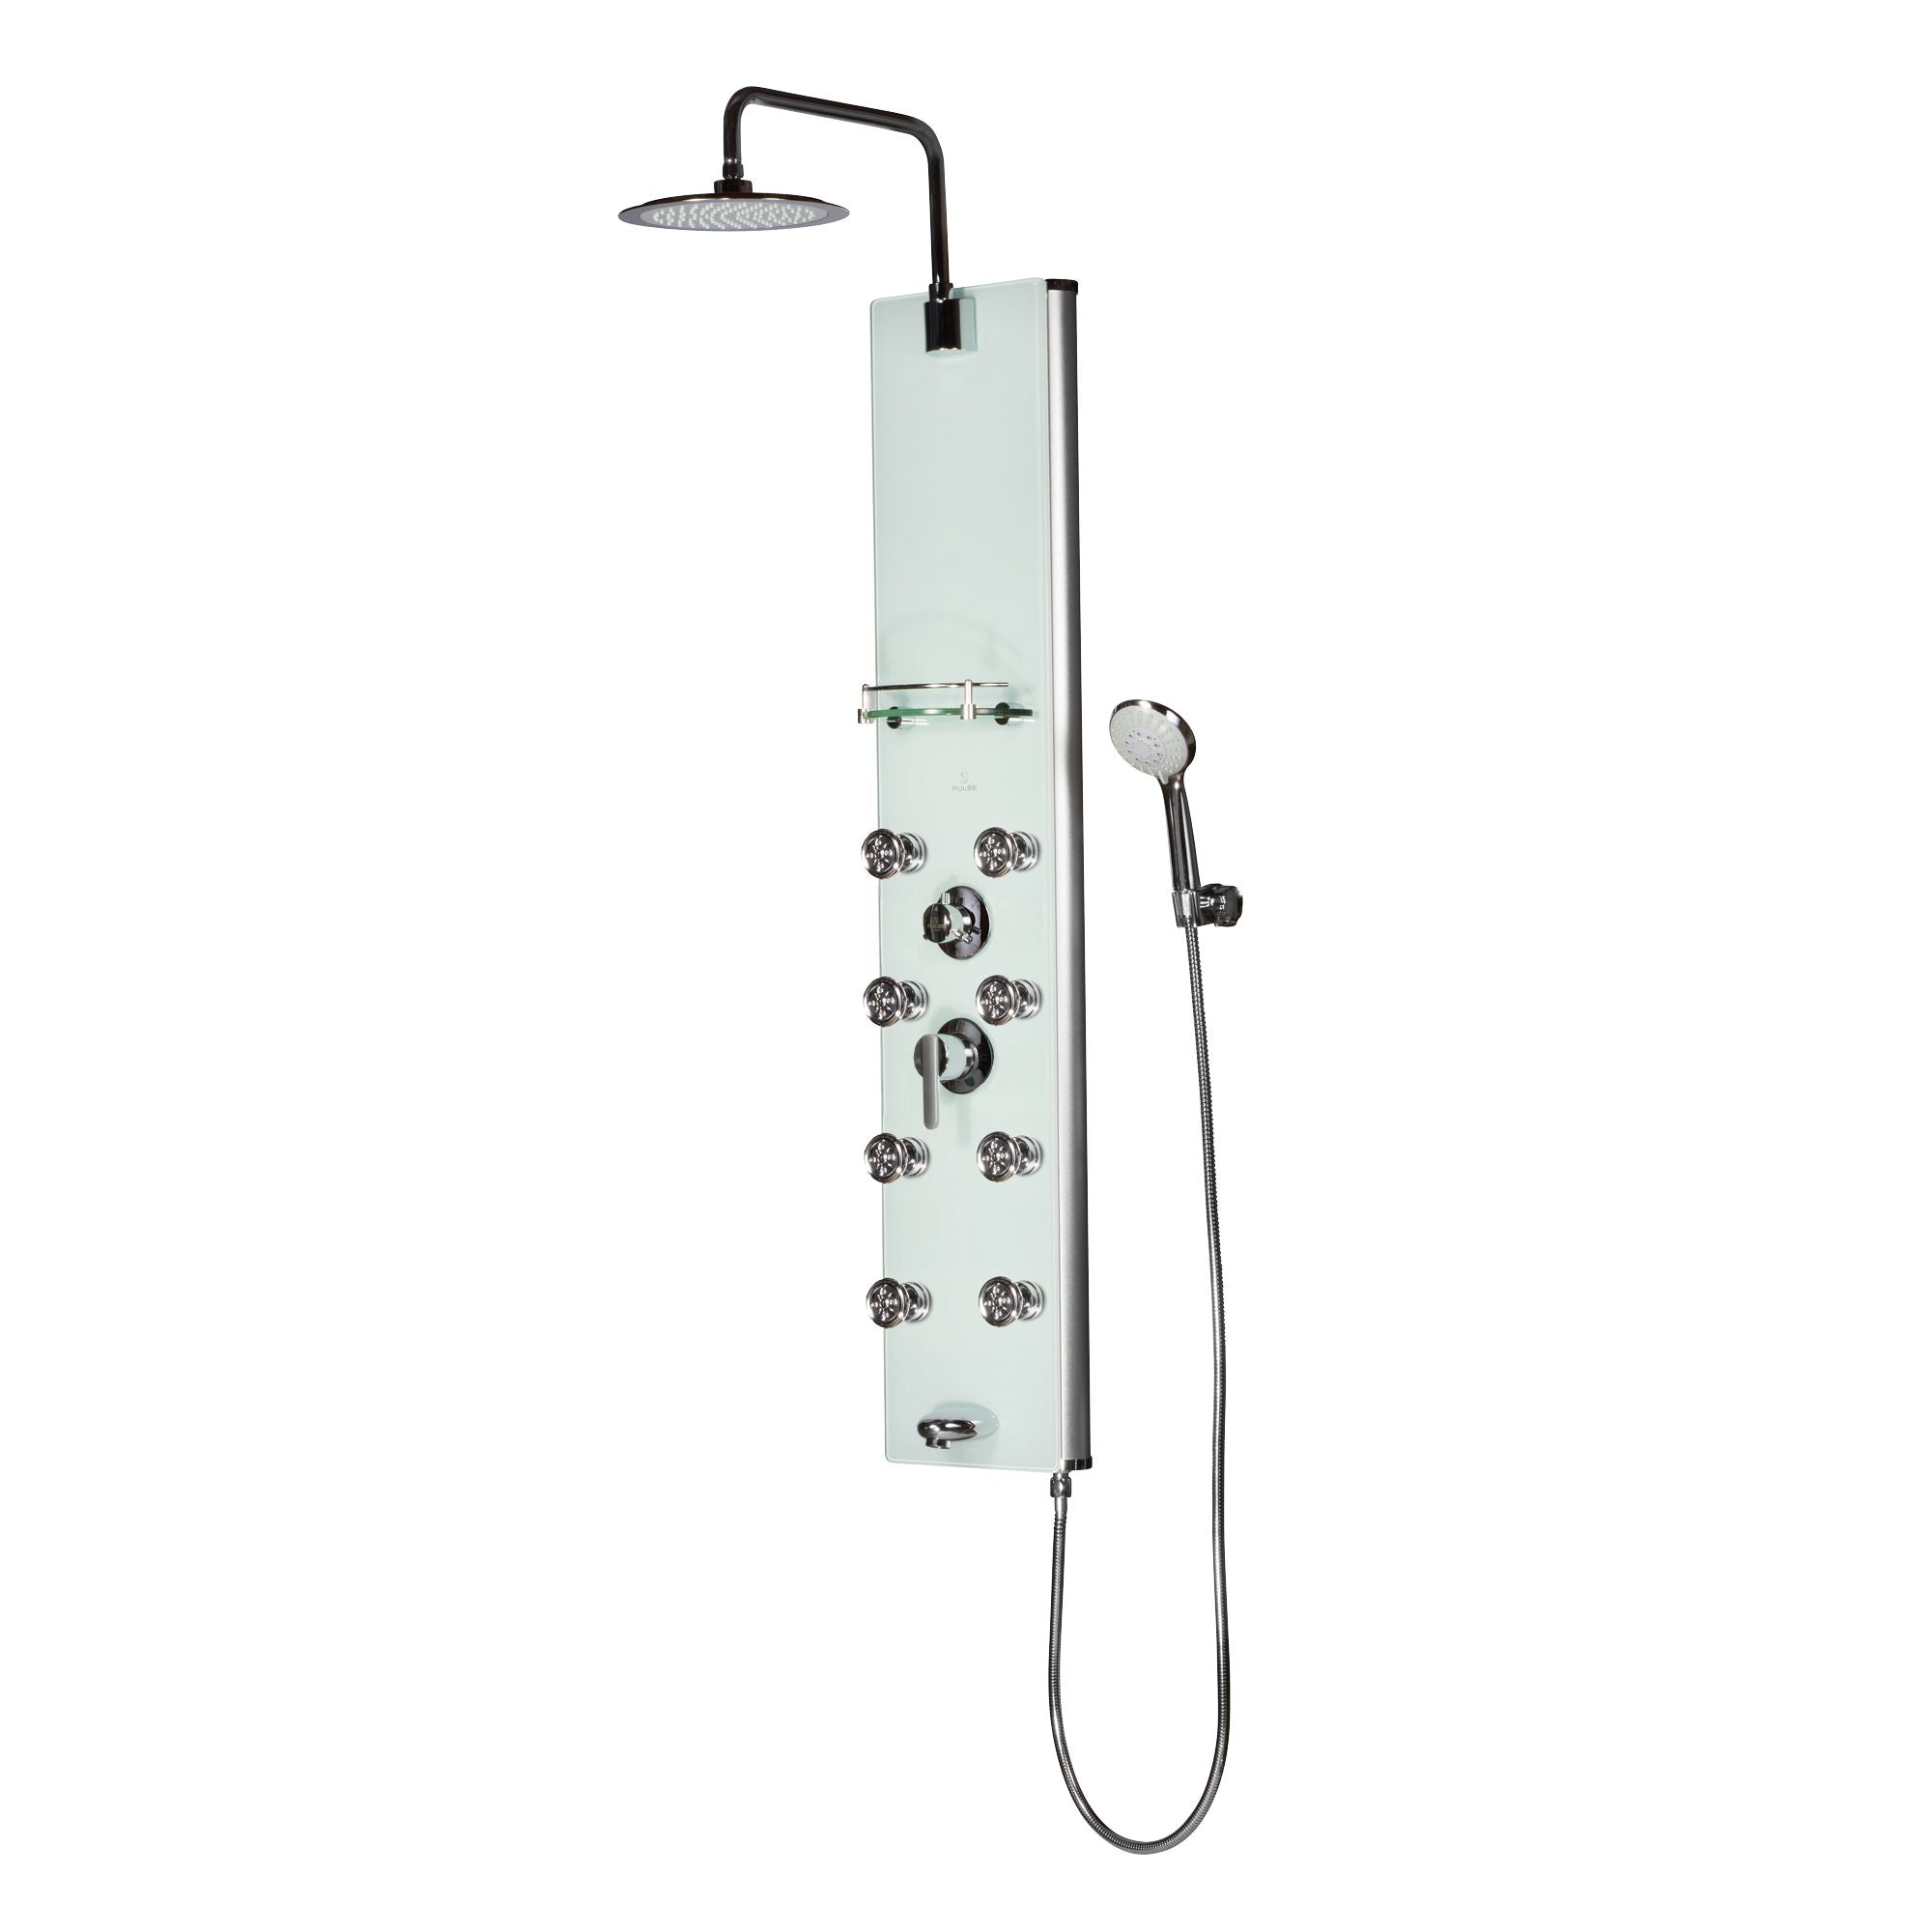 PULSE ShowerSpas Seafoam Glass Shower Panel - Lahaina ShowerSpa - Seafoam tempered glass panel with anodized aluminum frame and chrome accents - with 9-1/2-in thin profile rain showerhead with soft tips, brass shower arm, 8 dual-function Select-a-Jets, 5-function hand shower with double-interlocking stainless steel hose, and glass shelf - 1030 - Vital Hydrotherapy